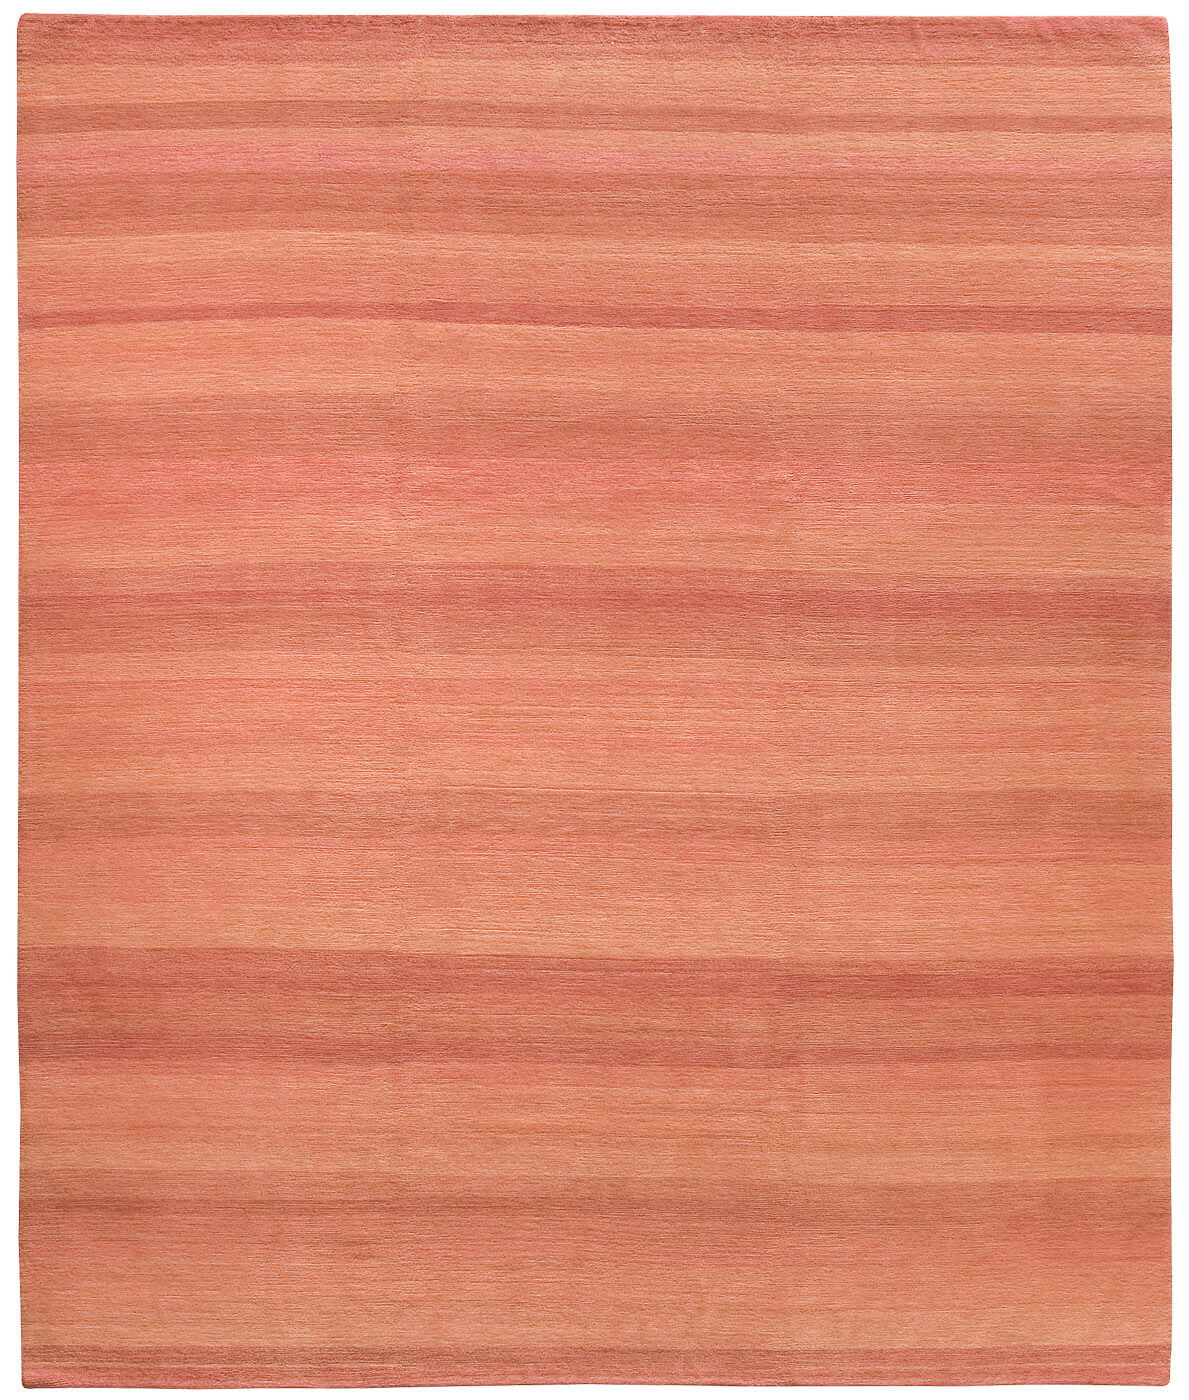 Hand-woven Pink Stripes Luxury Rug ☞ Size: 200 x 300 cm